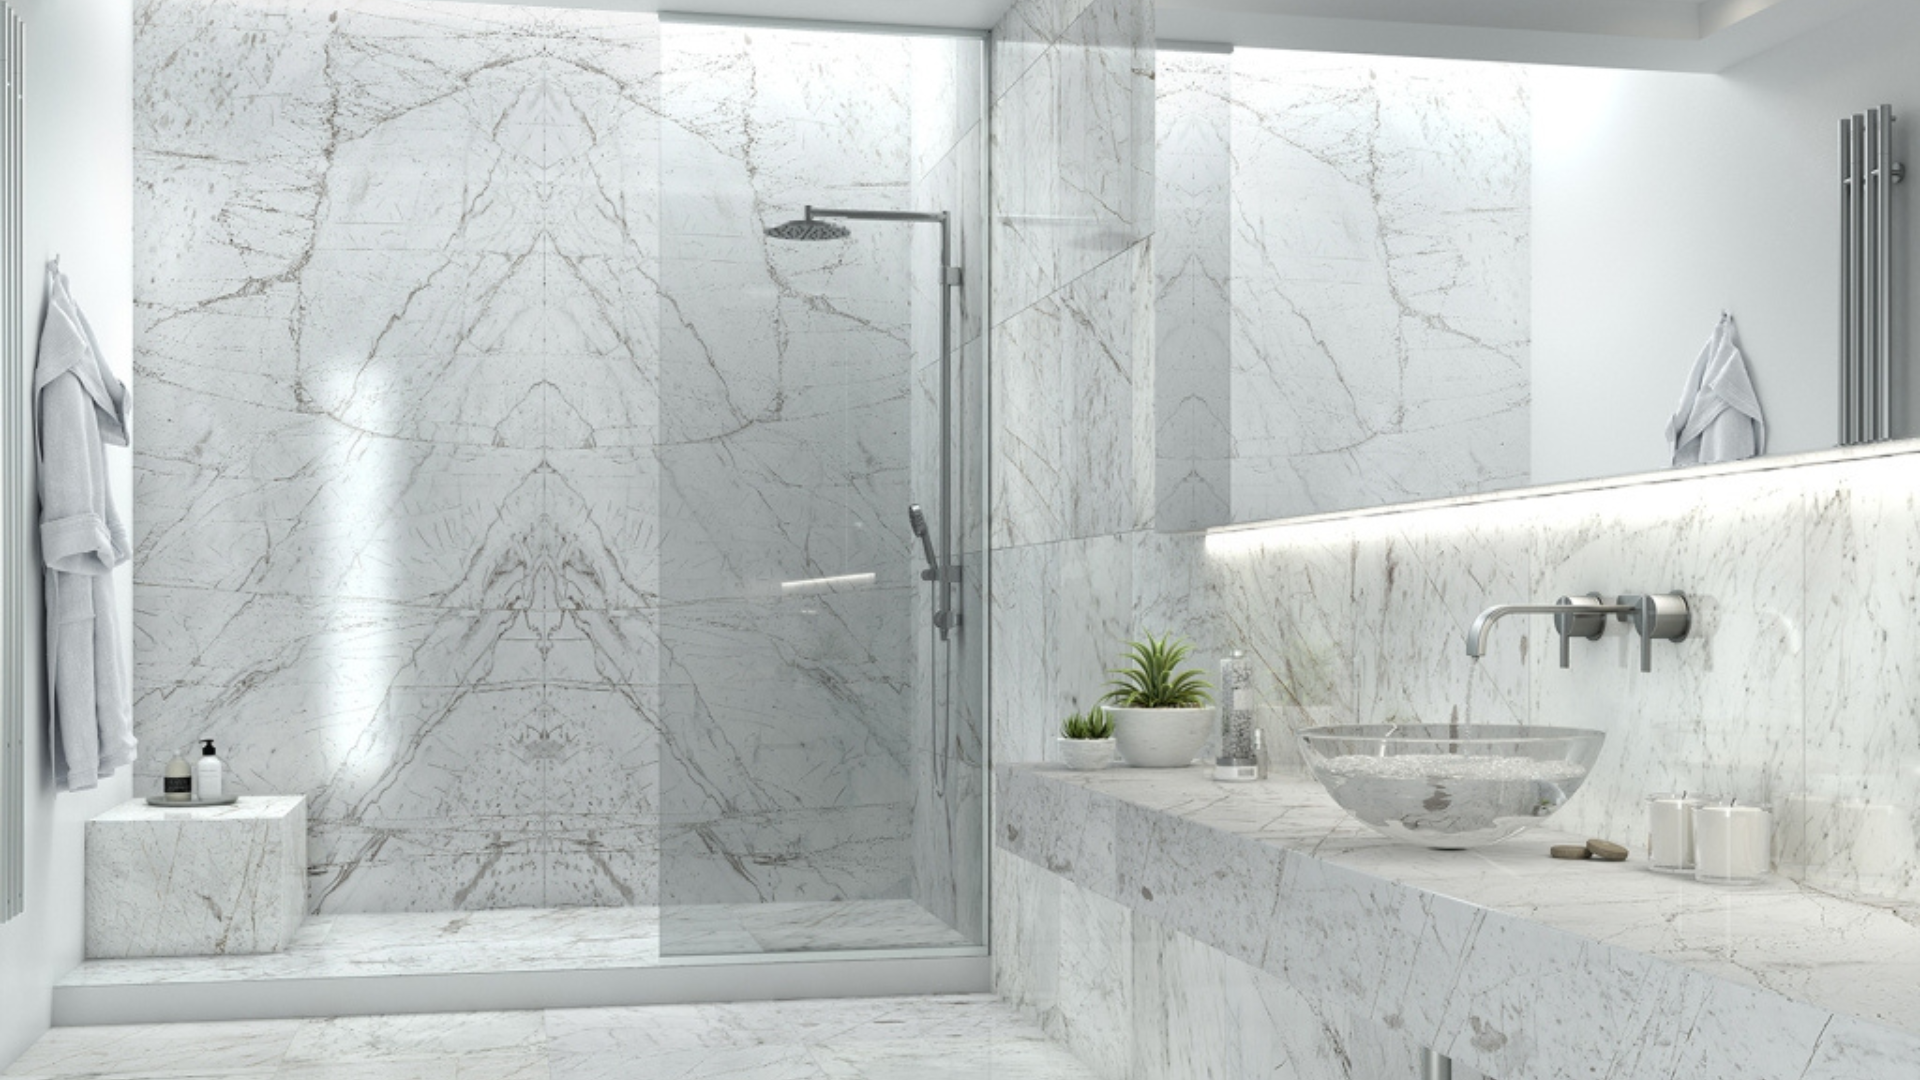 Rendering of a bathroom, sleek interior design, with white marble on the countertops, sink, shower, walls and flooring for a clean aesthetic